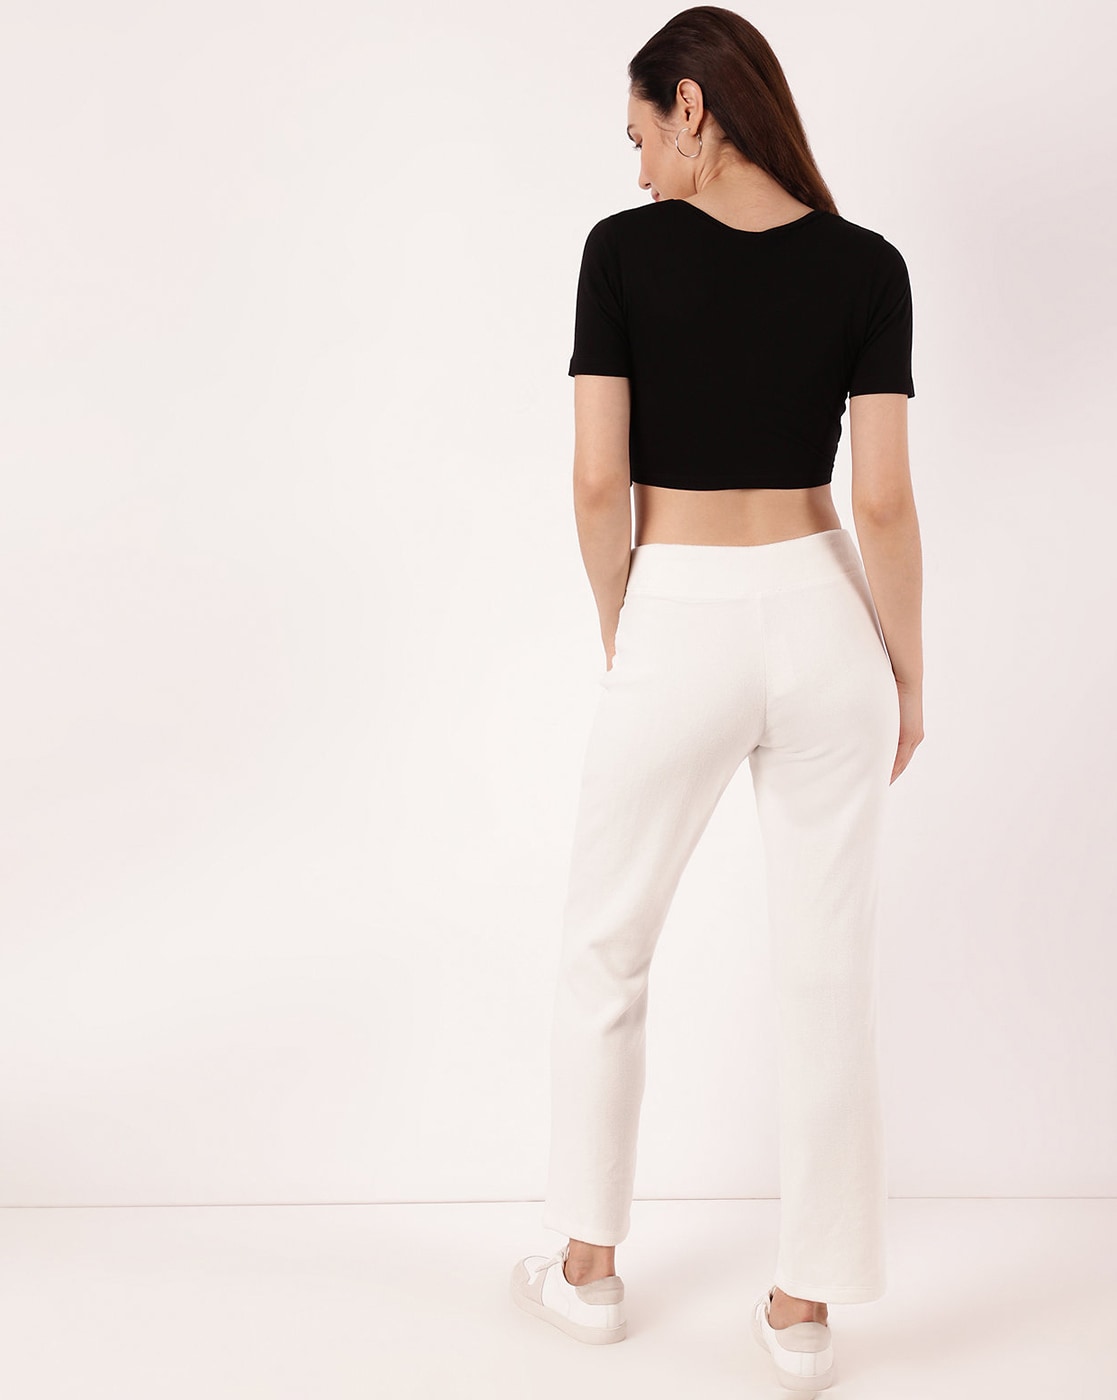 Buy White Formal Trousers For Female Online  Best Prices in India   UNIFORM BUCKET